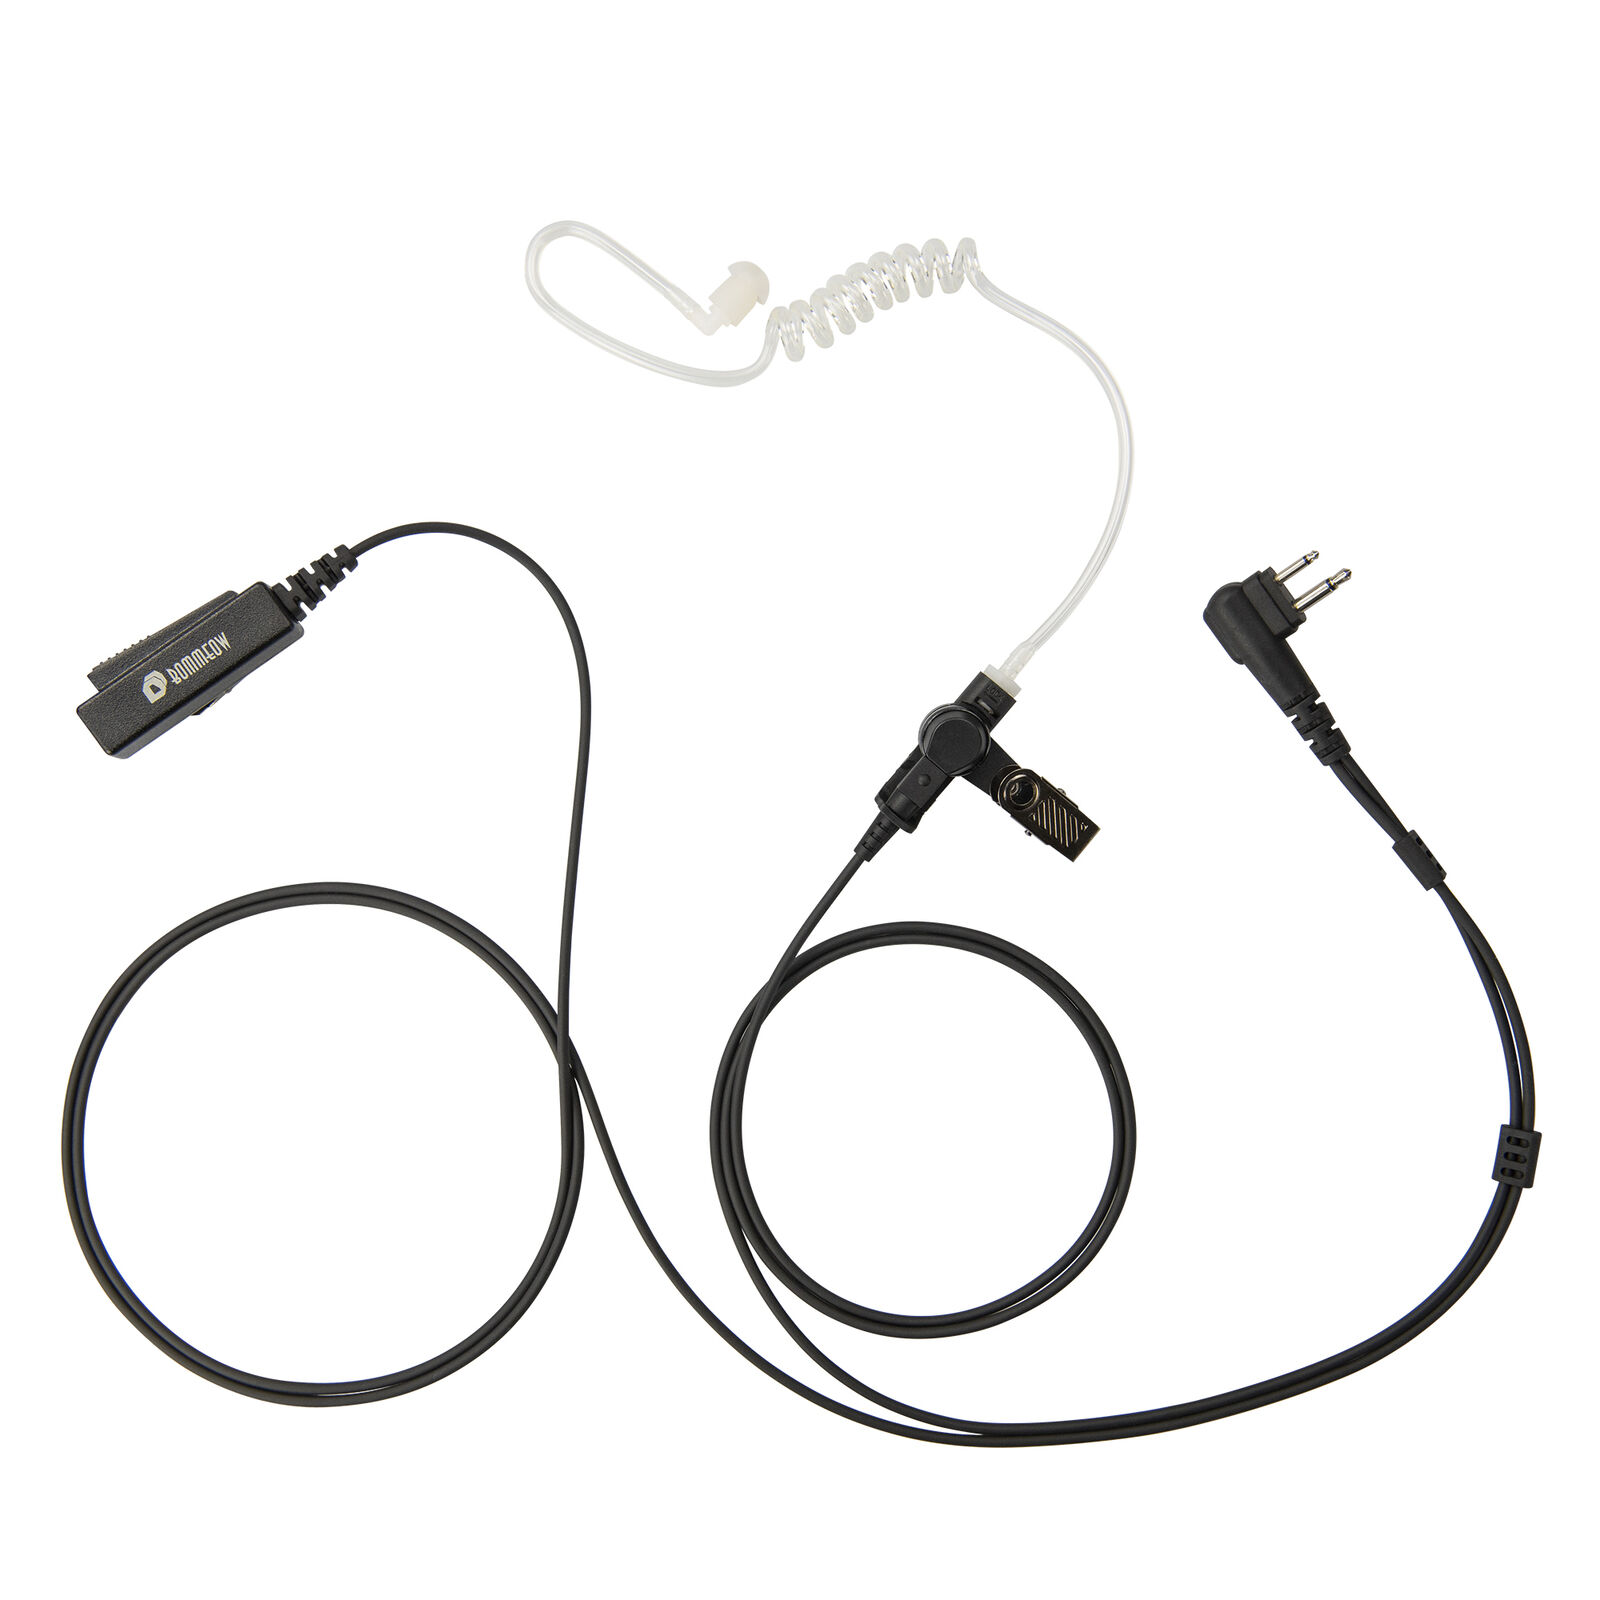 Warehouse Jacksonville Mall Two-Wire Acoustic Air Tube PTT Motorola C for Ranking TOP6 Earpiece